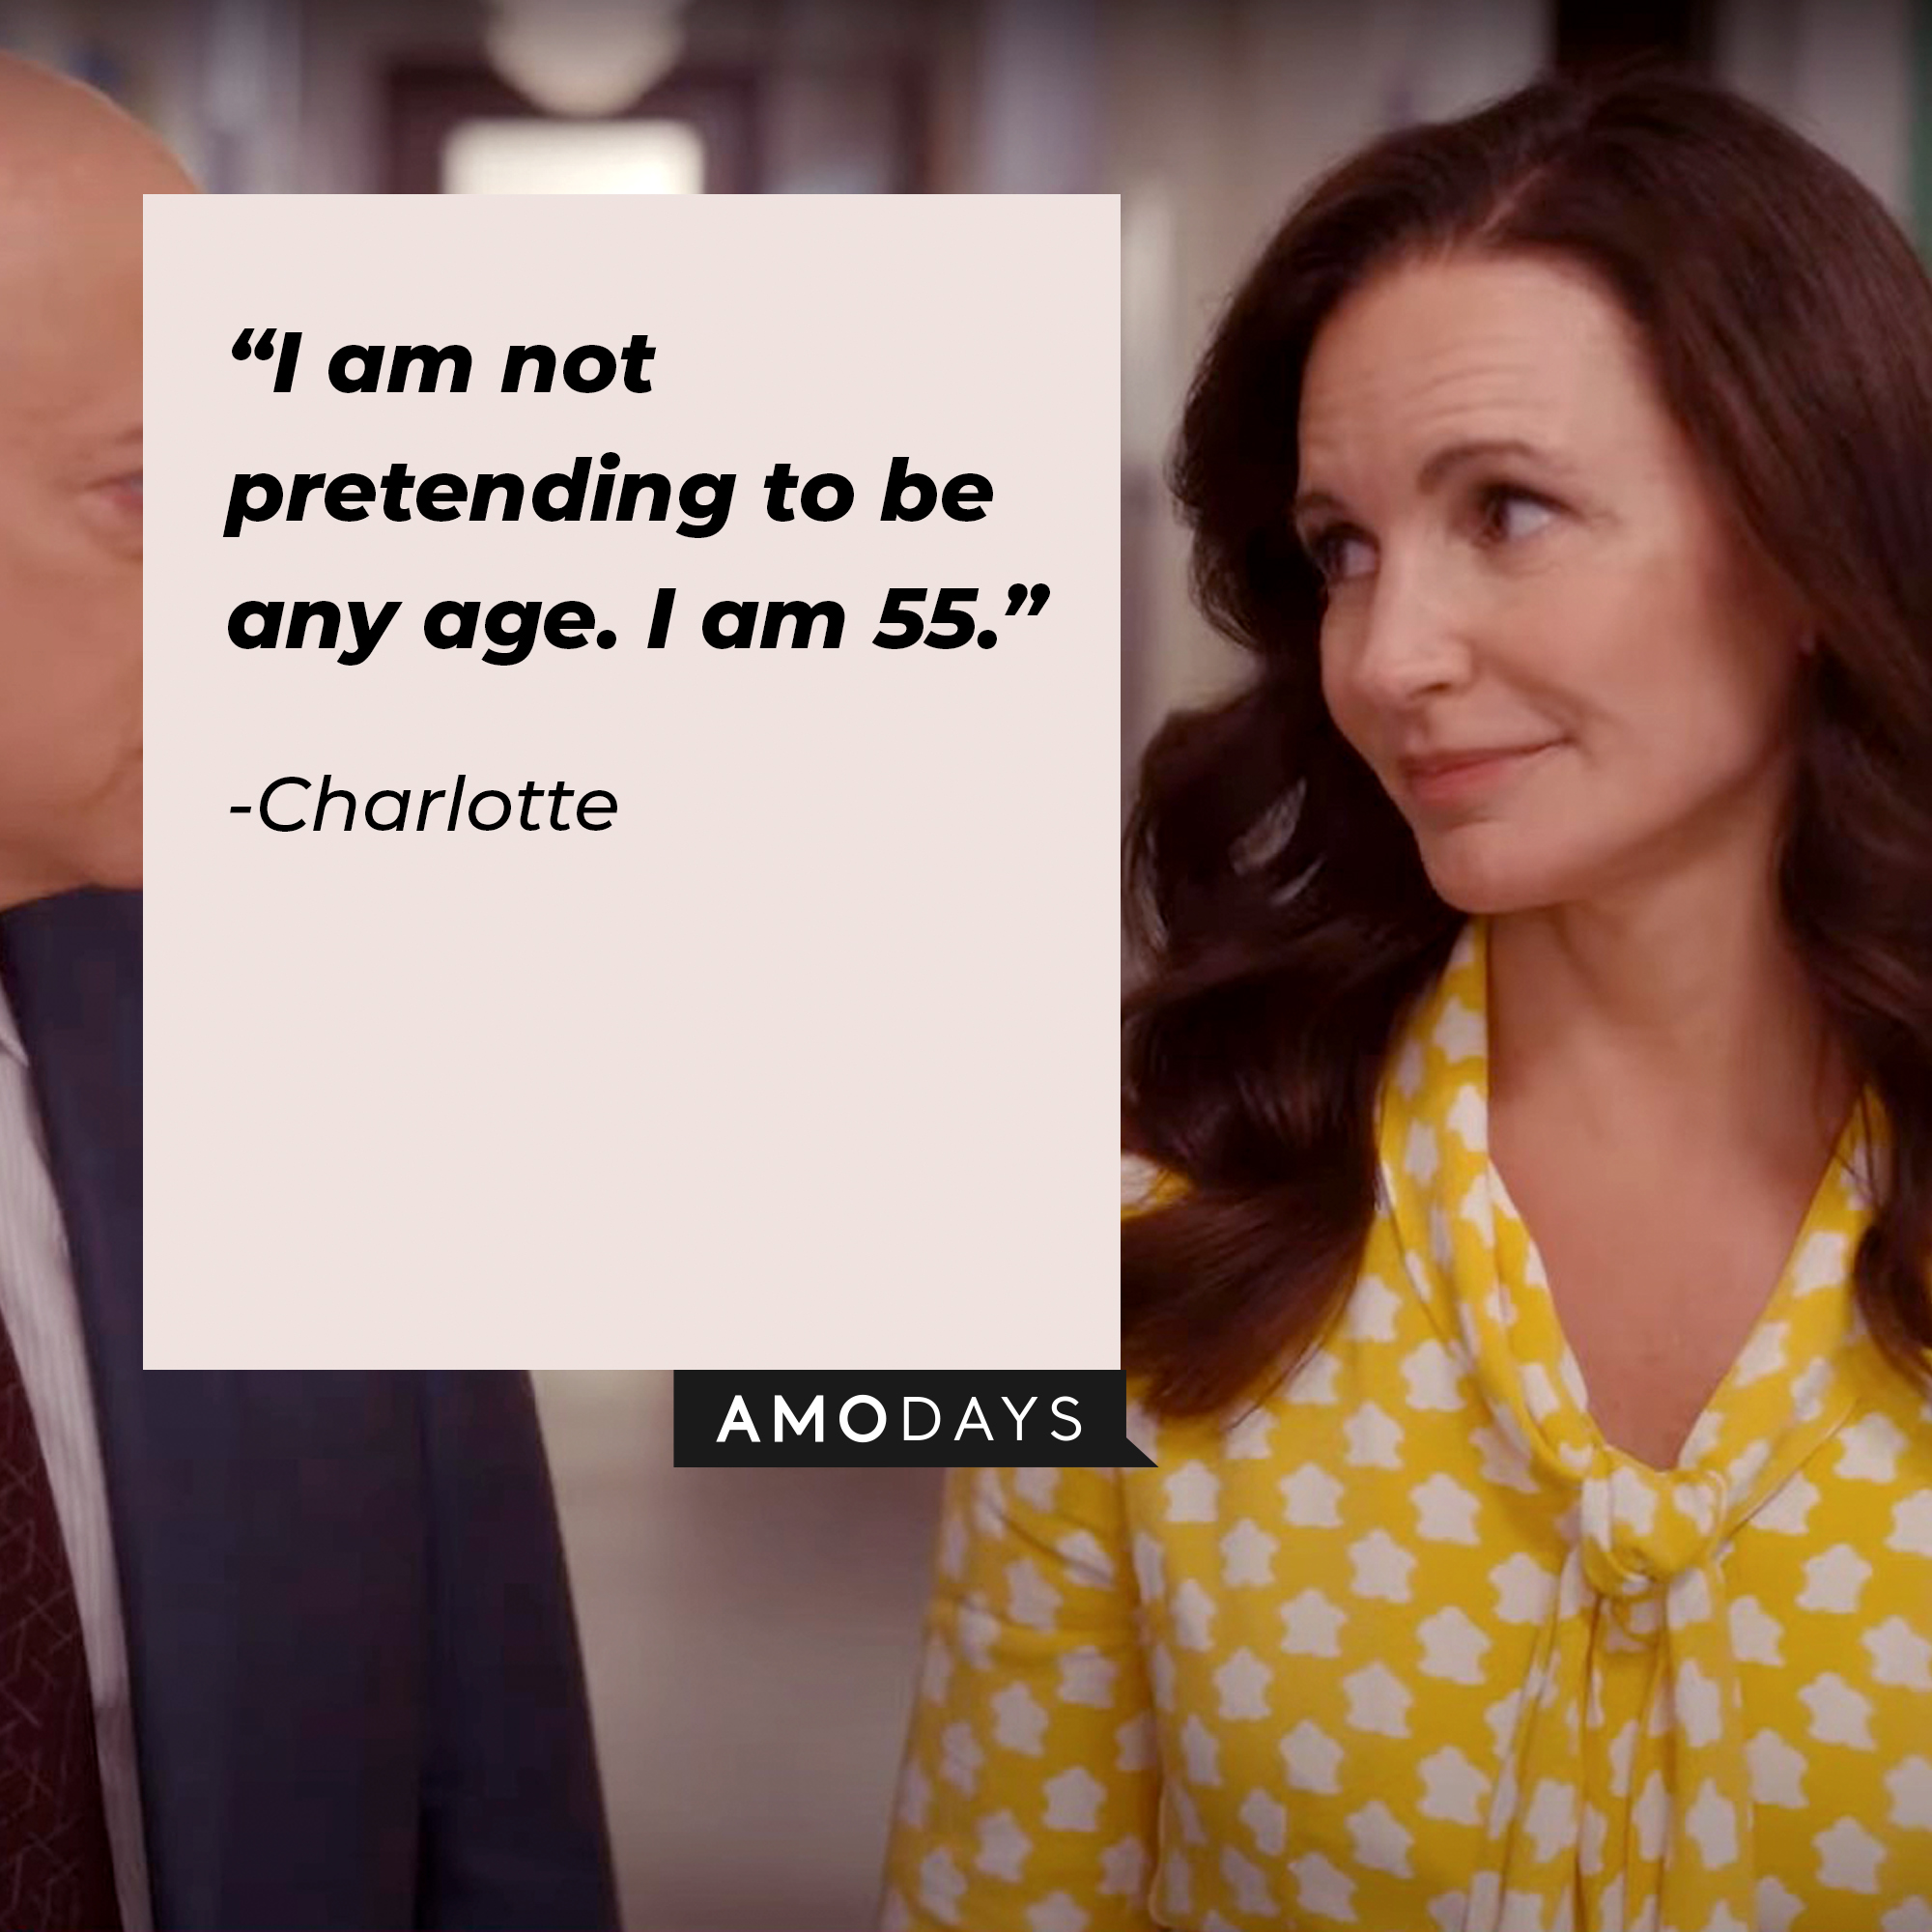 An image of Charlotte with her quote: “I am not pretending to be any age. I am 55.”  | facebook.com/justlikethatmax